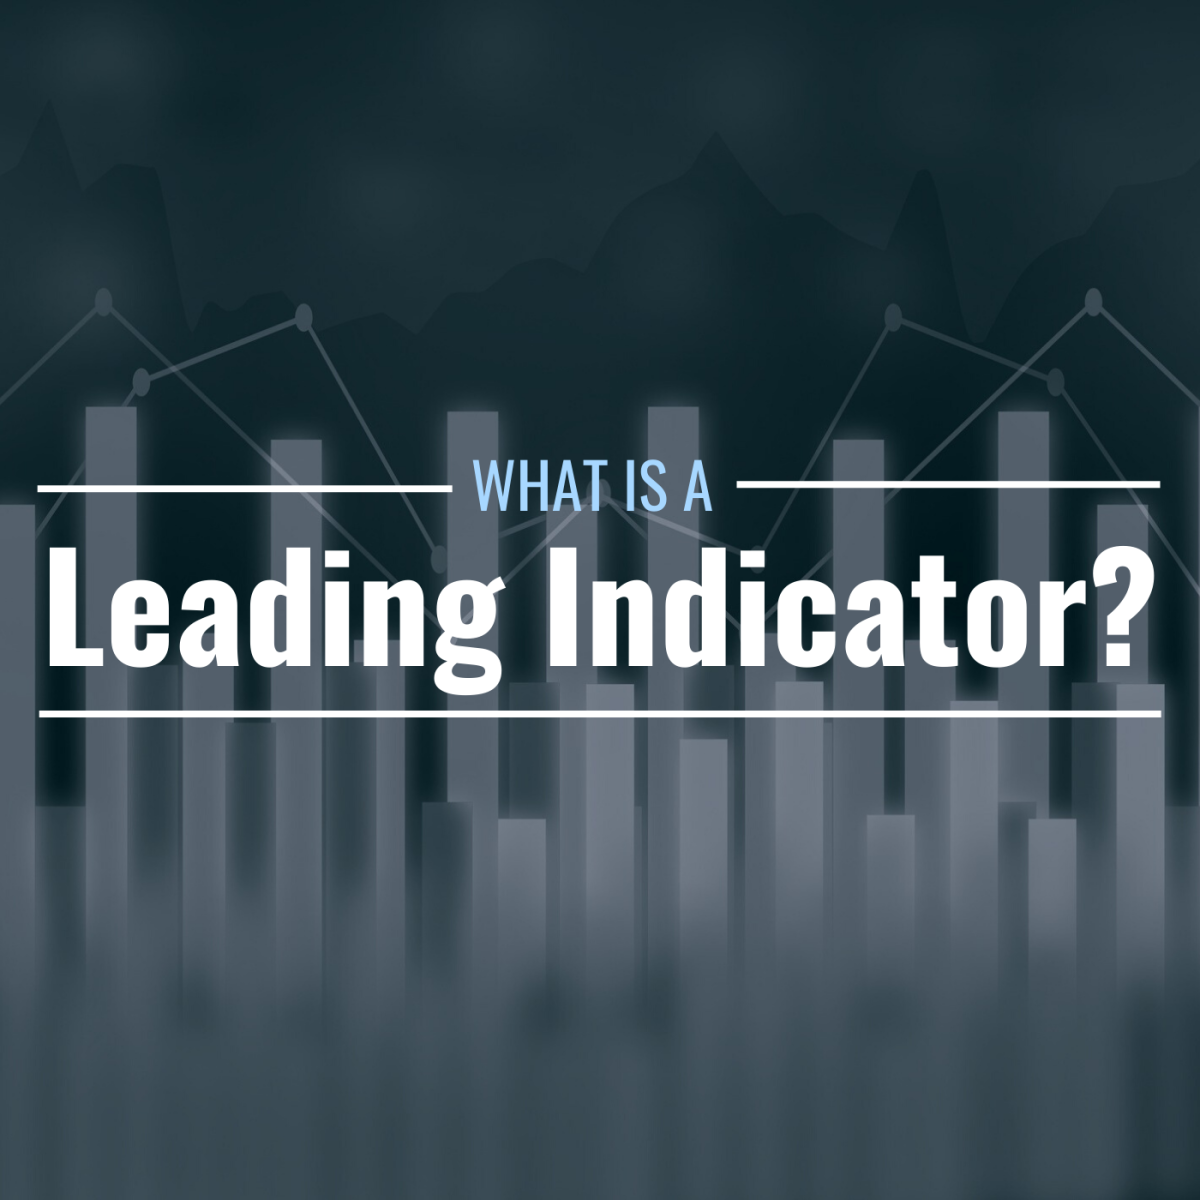 Image of a bar chart with text overlay: "What Is a Leading Indicator?"